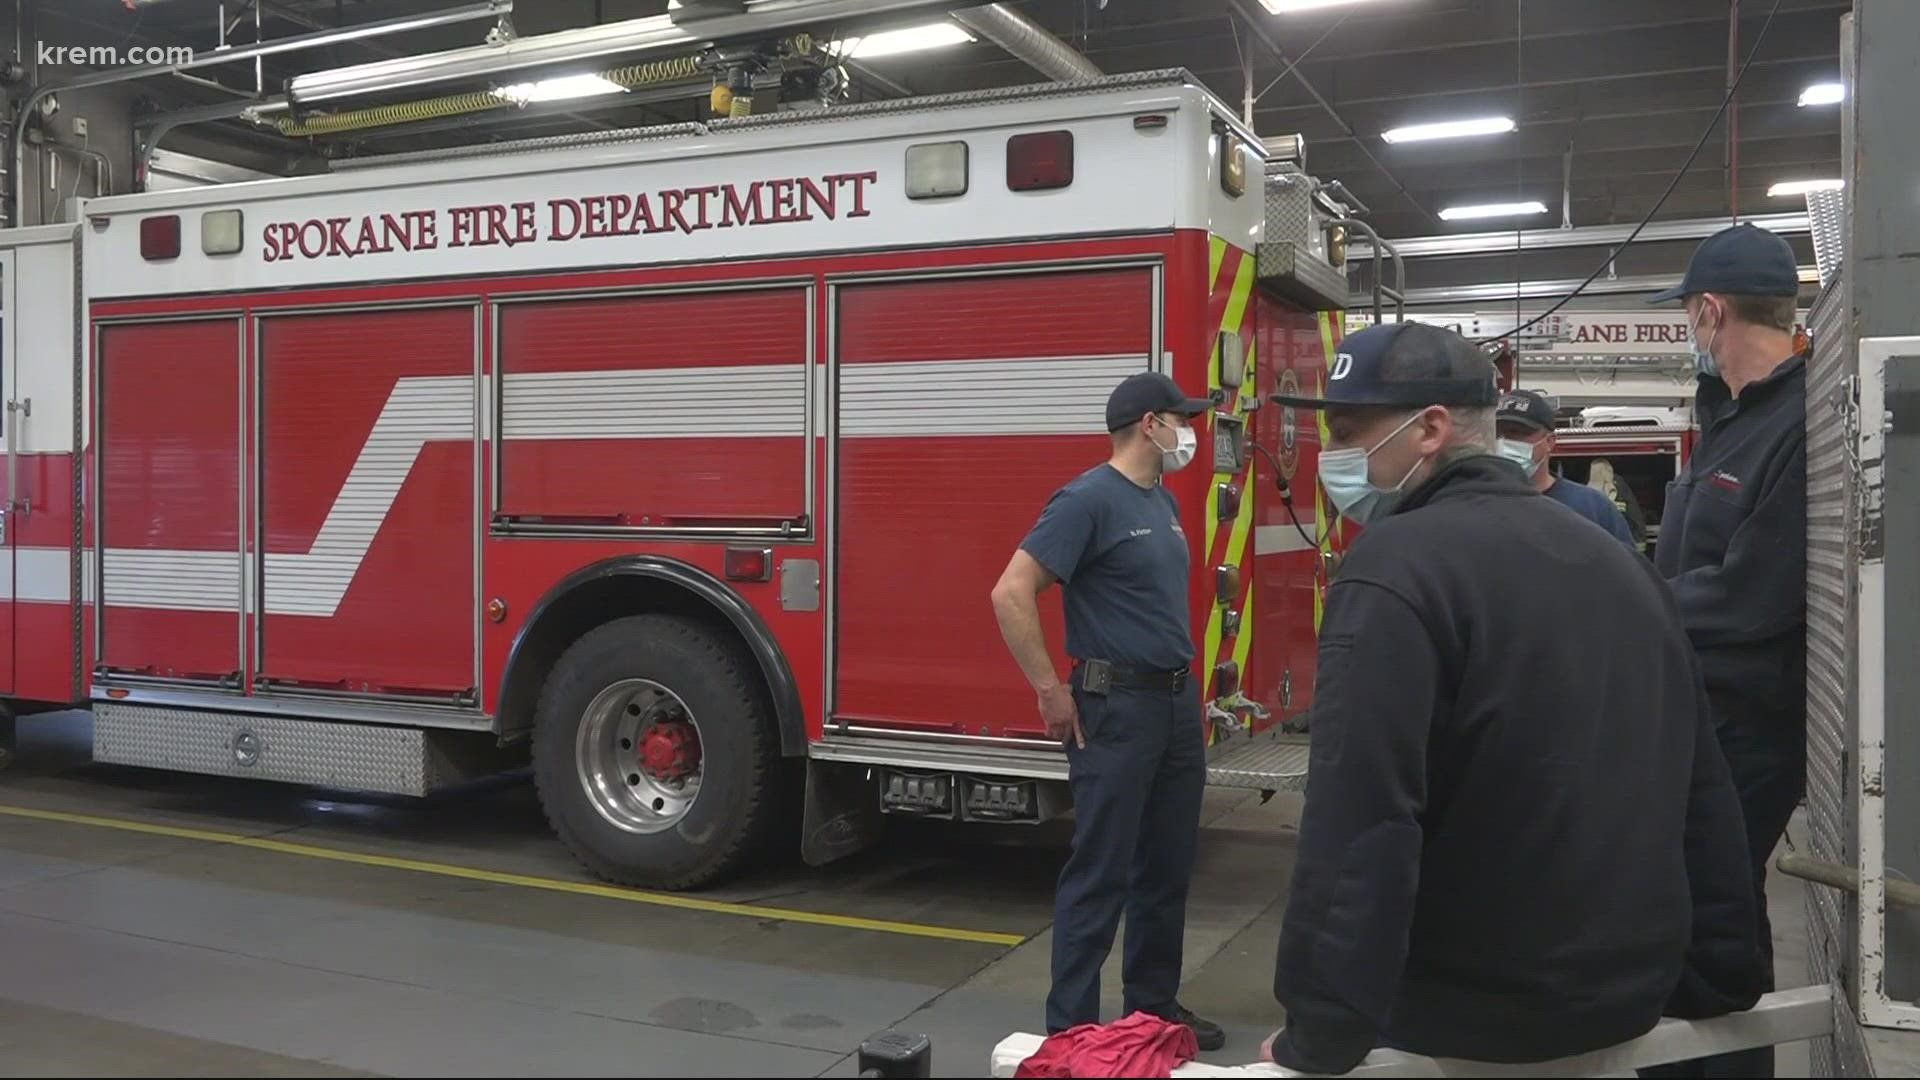 The city of Spokane said it is not considering a vaccine mandate for its employees, at this time. That includes the Spokane Fire Department.